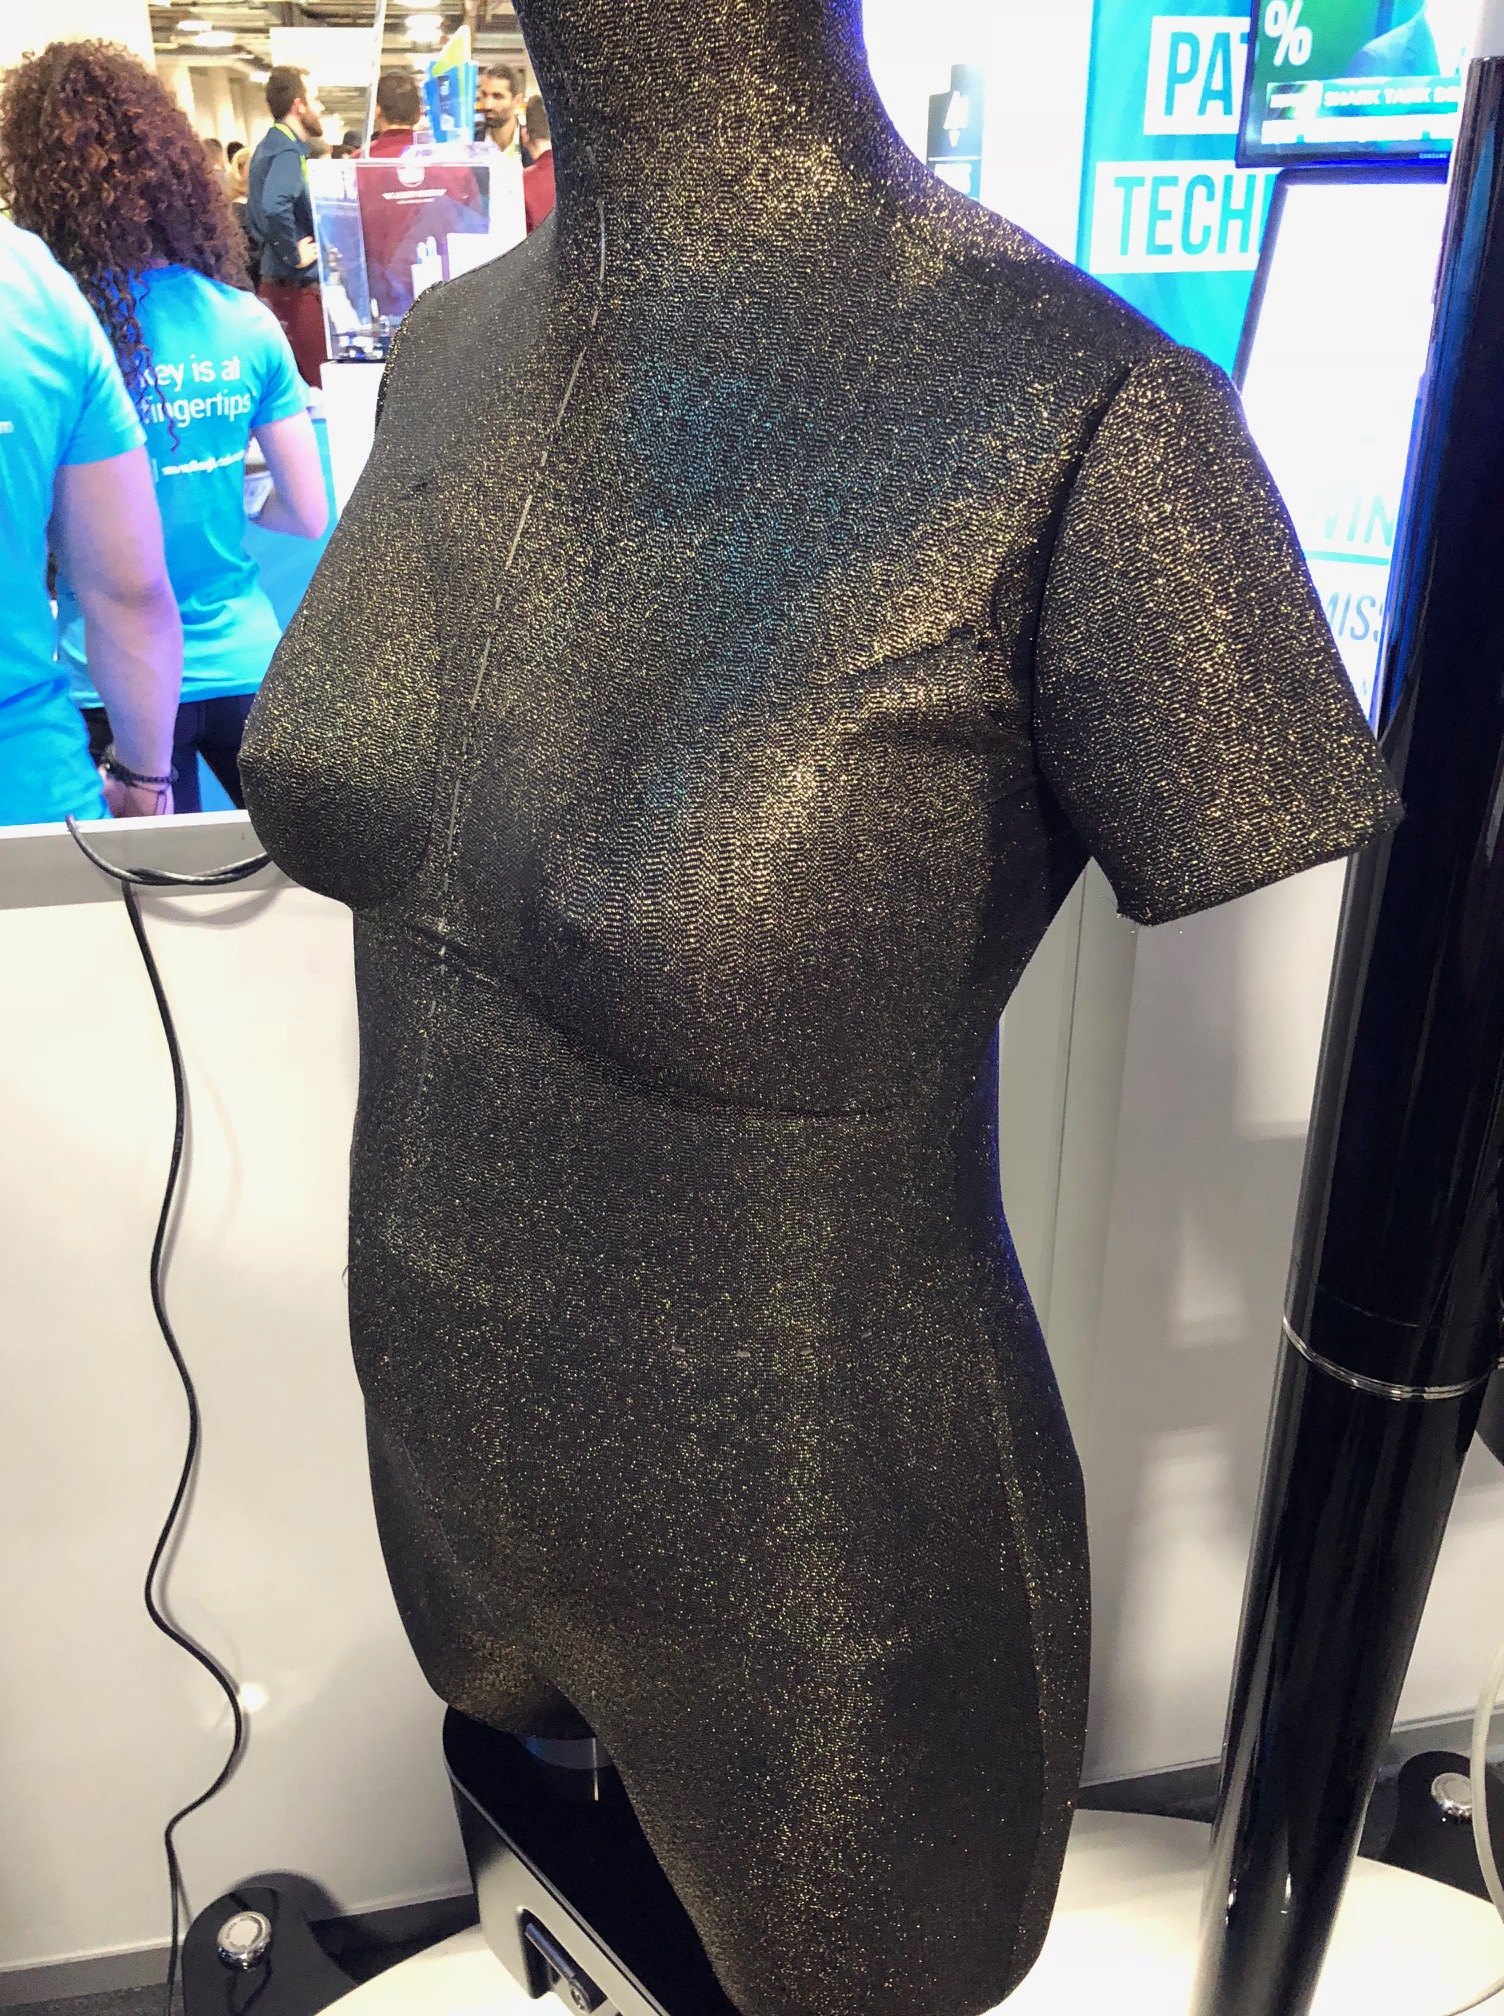 Euveka's robot mannequin, shown at CES 2018, can adjust its size to fit different body types. (Lisa Eadicicco)